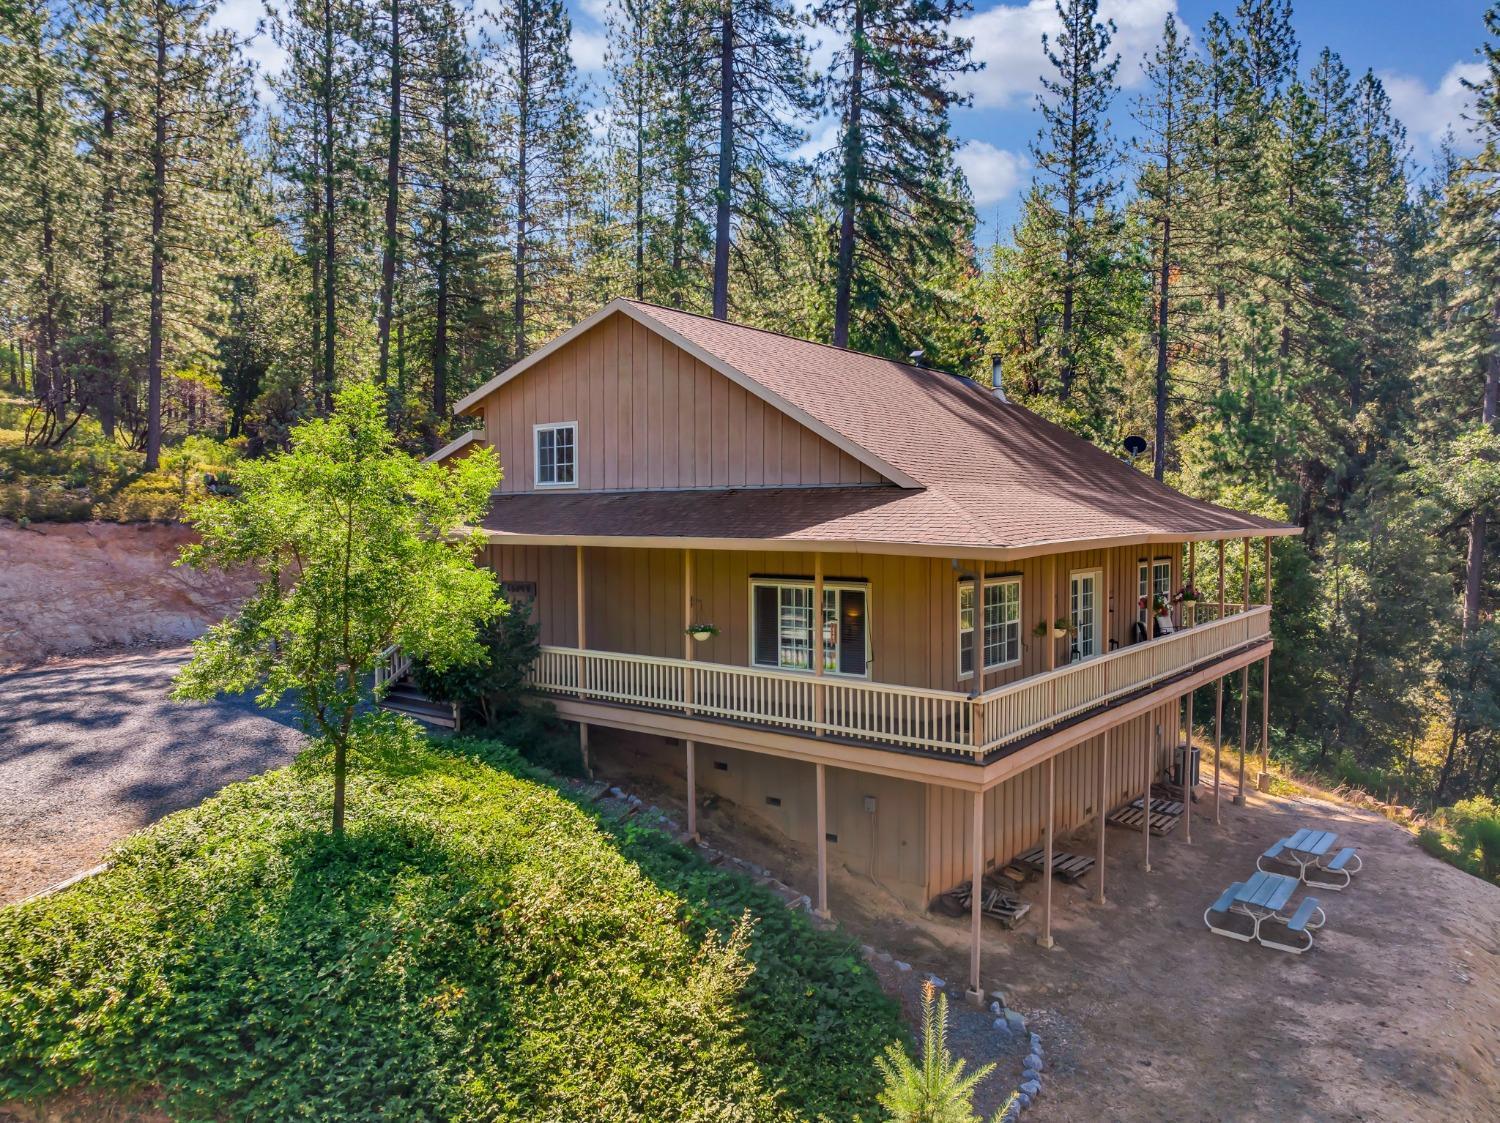 Photo of 26649 Old Loggers Ln in Colfax, CA